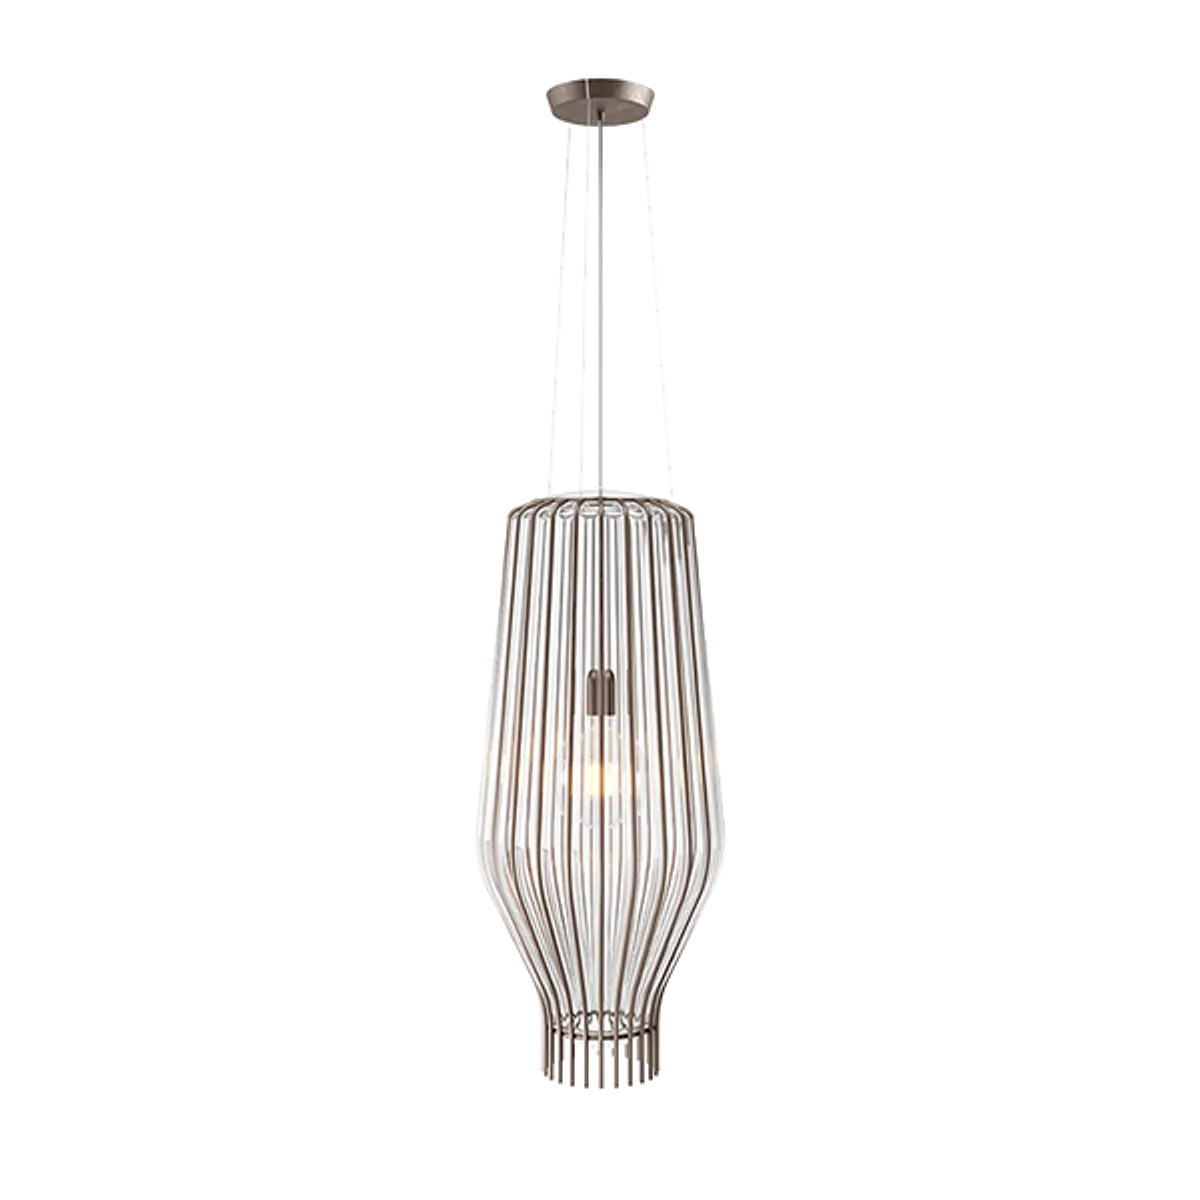 Saya Pendant Lamp 31Cm Uk Supplier Inside Out Contracts